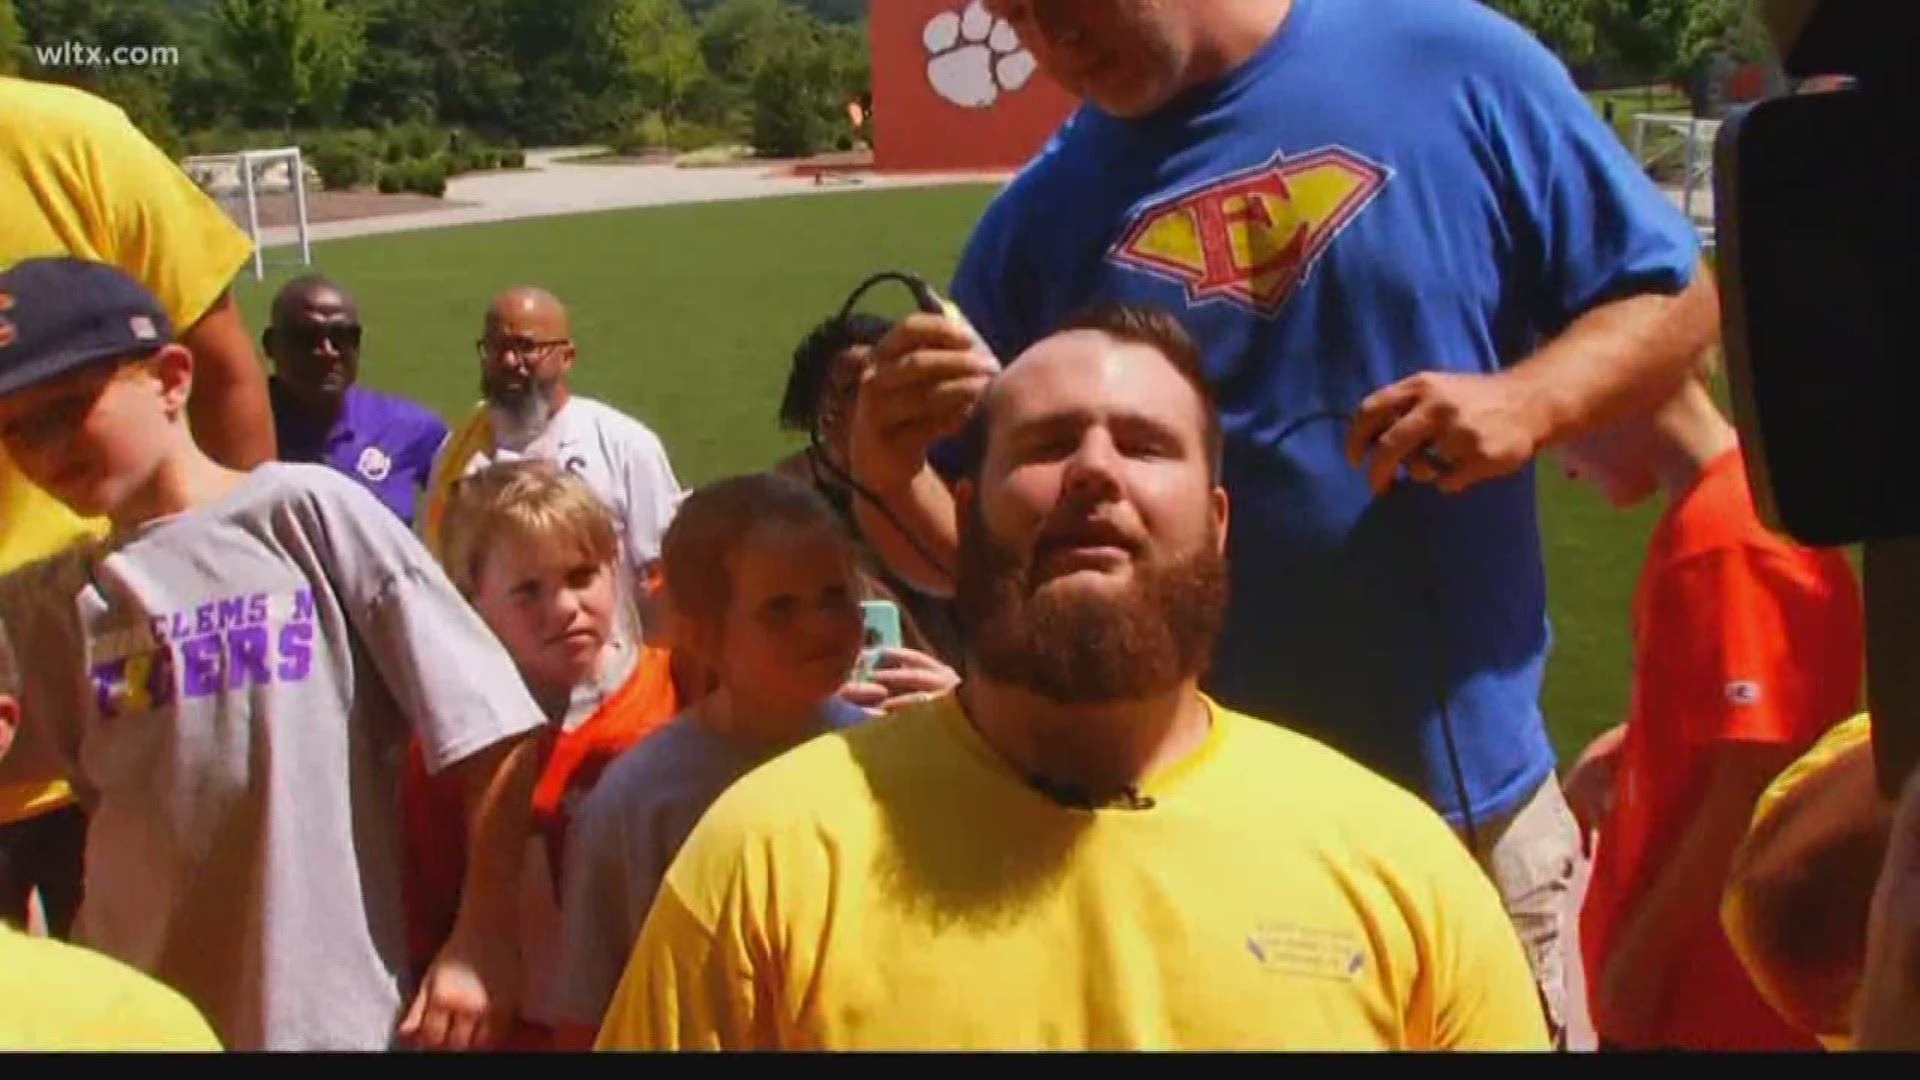 Clemson starting offensive lineman Sean Pollard has been locked in of late on helping kids with cancer have at least one day where they can have some fun and interact with the Tiger players.